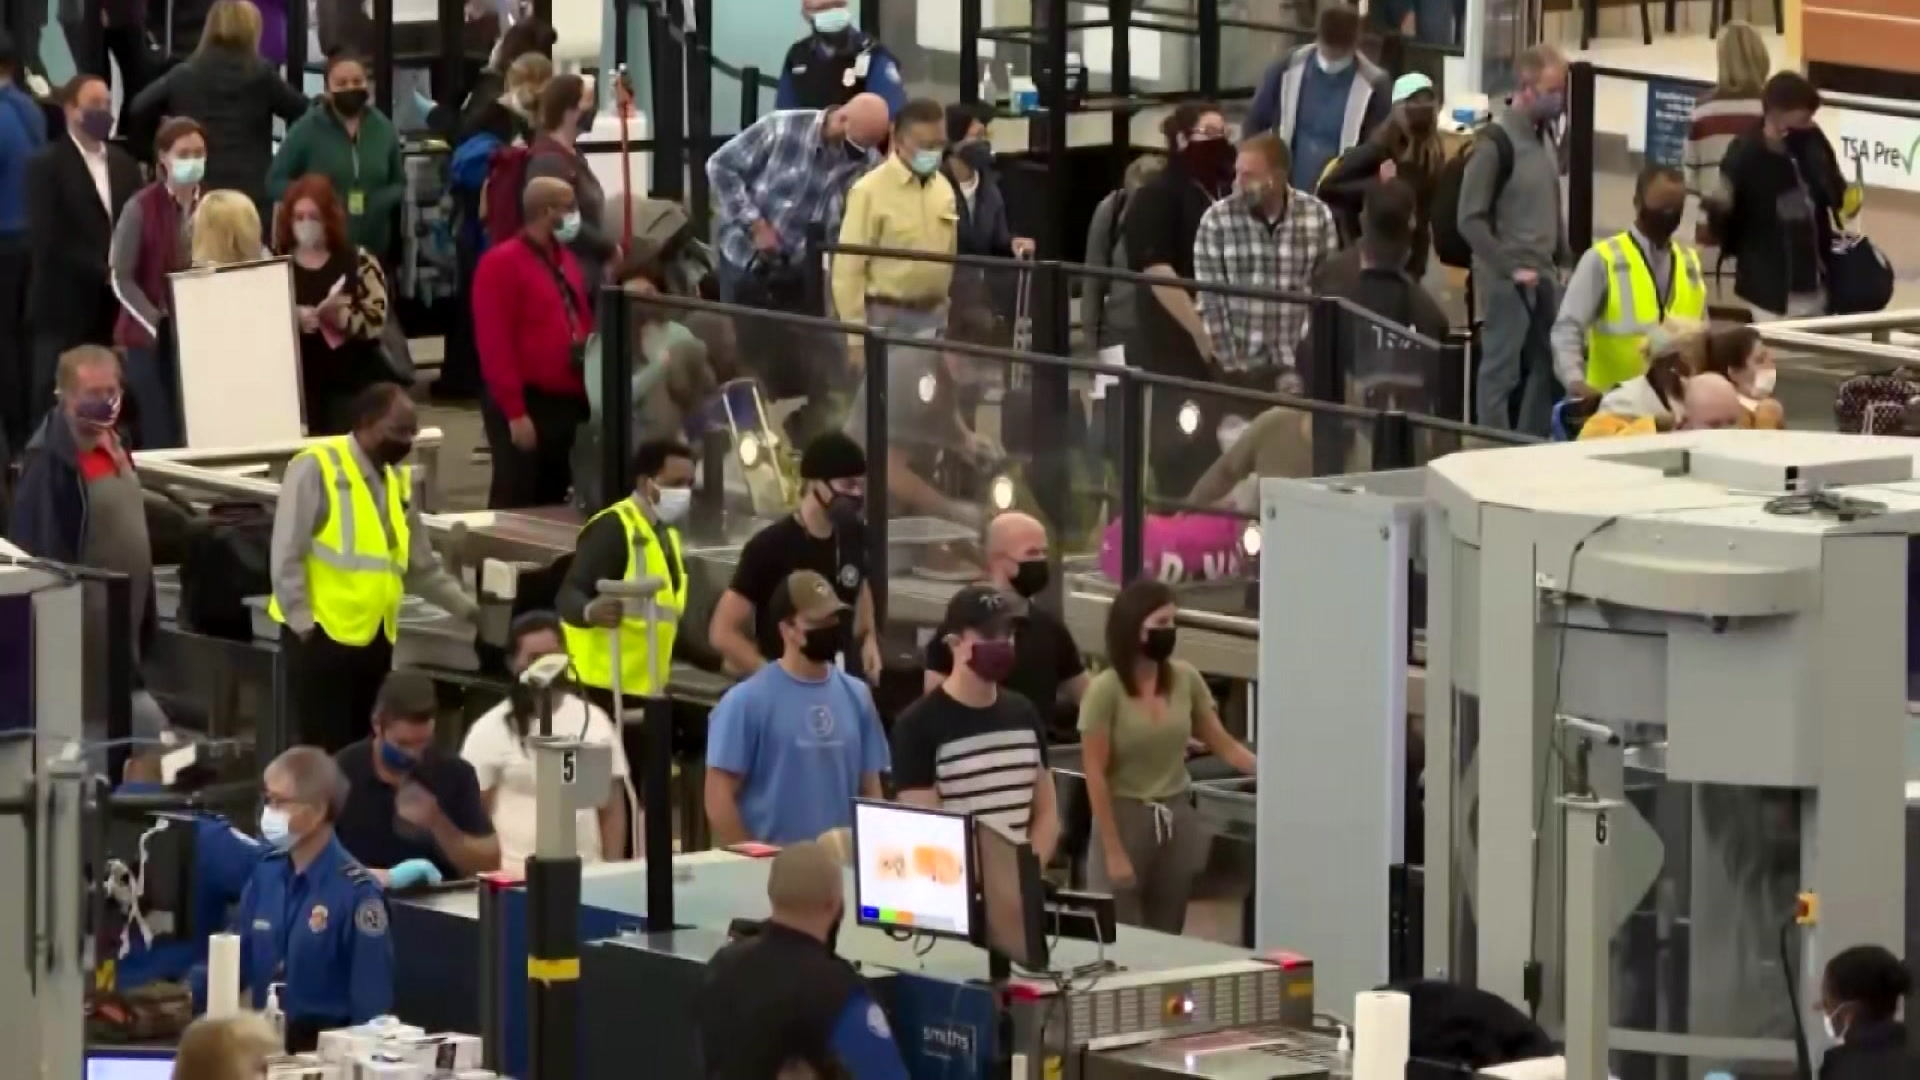 South Florida’s international airports expecting major increase in Memorial Day weekend travel